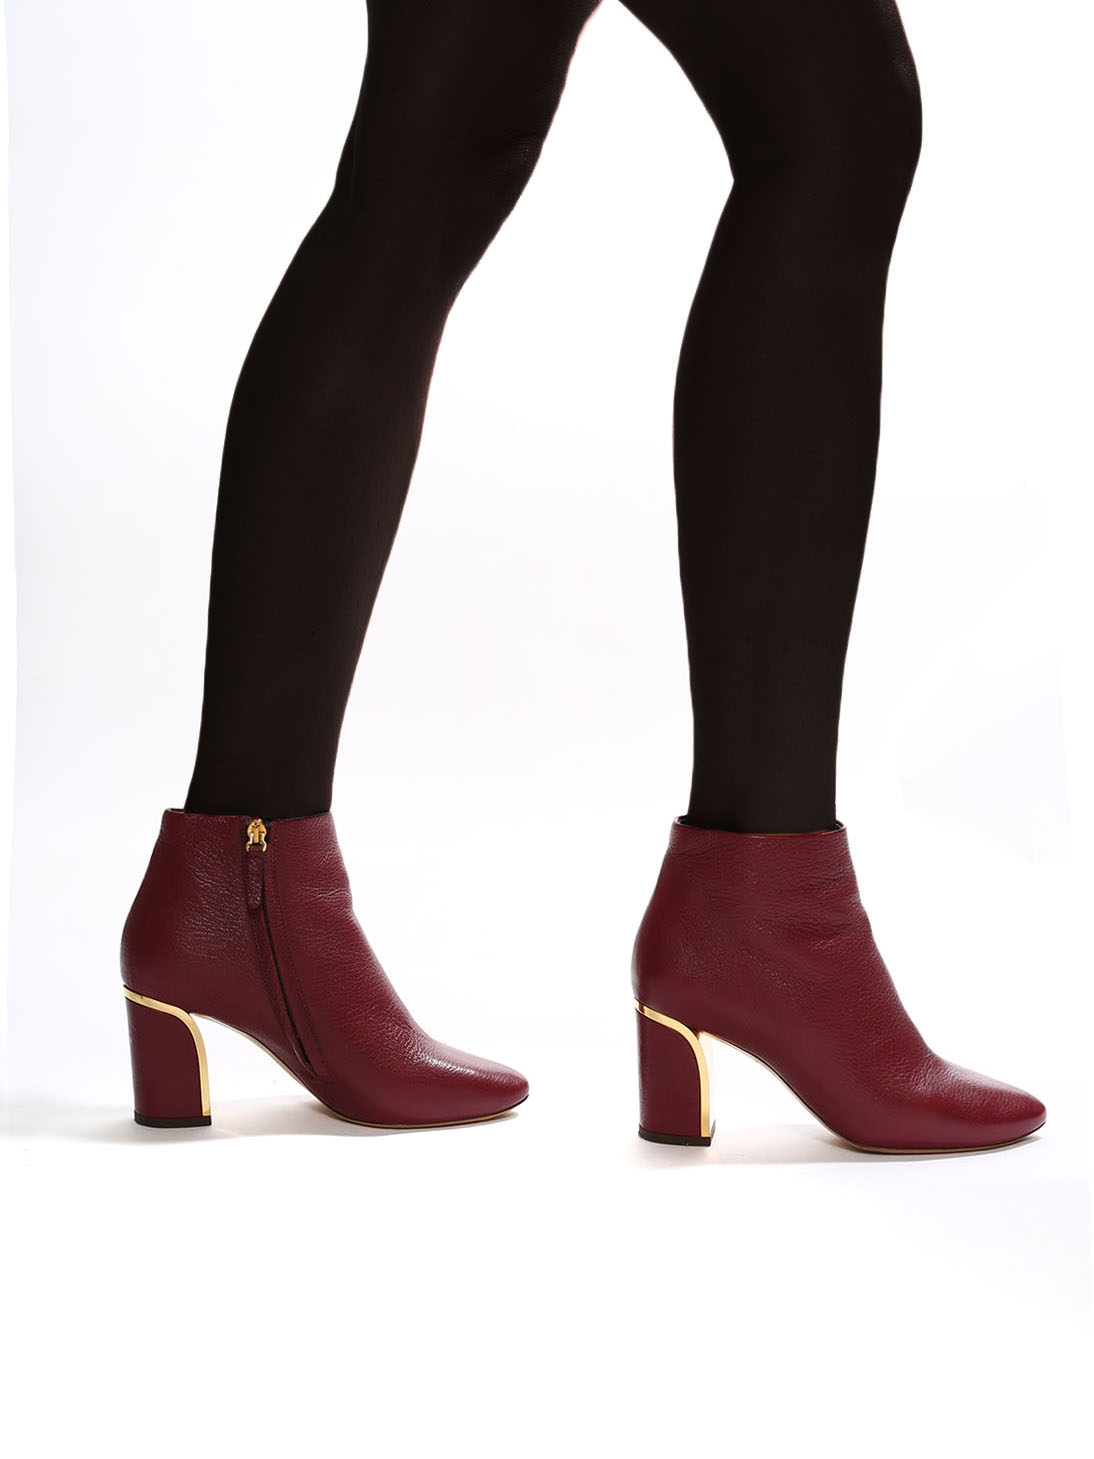 Louise Paris - BECKIE Crimson red leather gold-trimmed ankle boots NEW ...